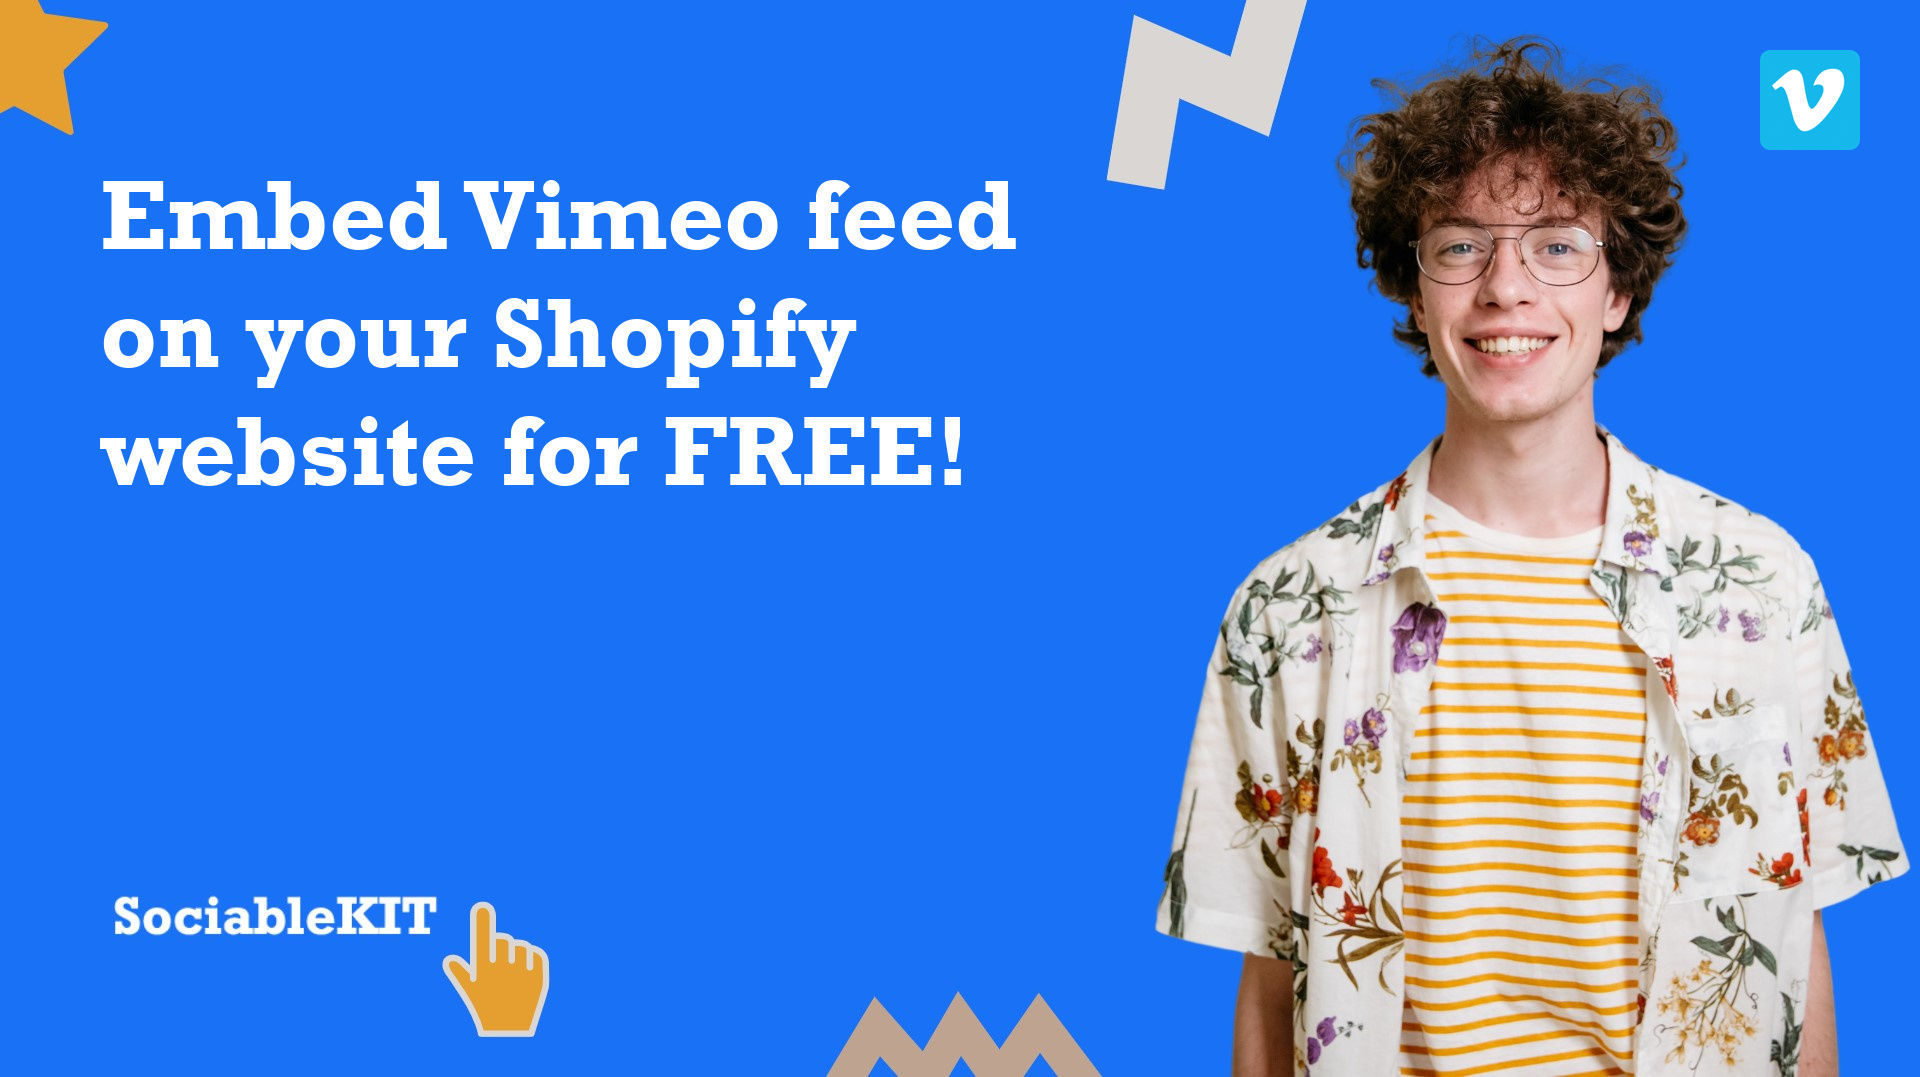 How to embed Vimeo feed on your Shopify website for FREE?